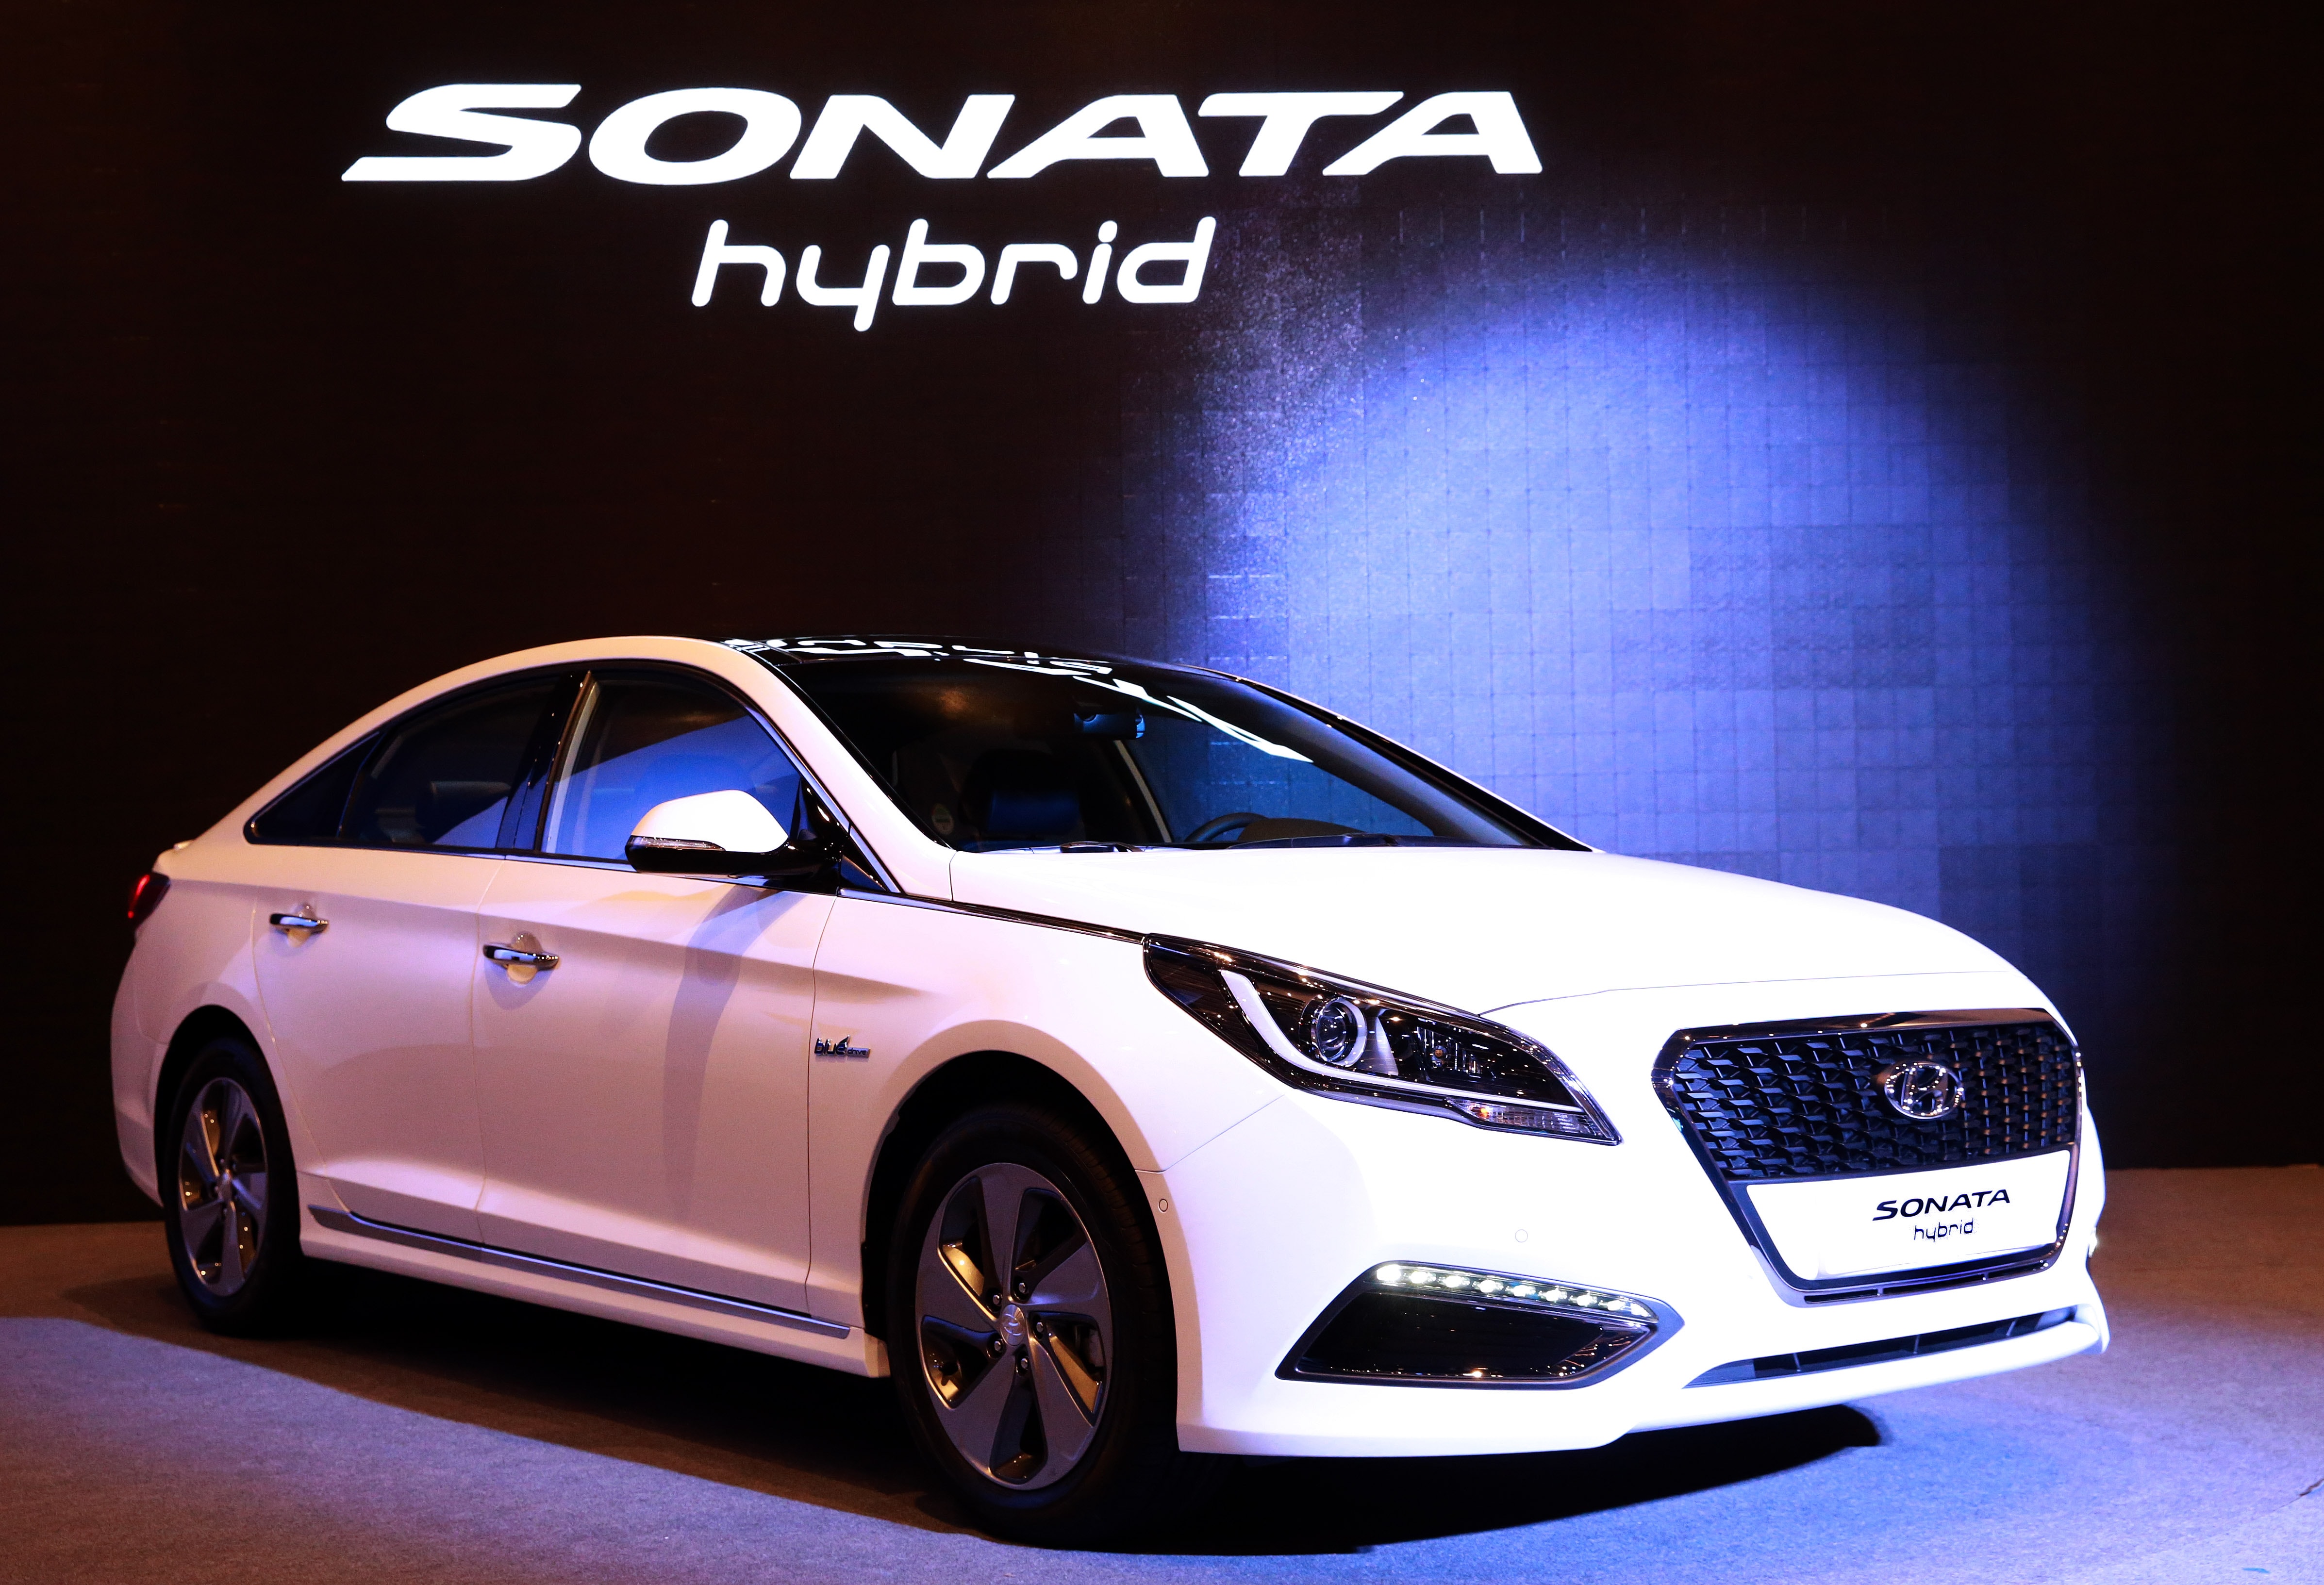 2016 Hyundai Sonata Hybrid Previewed at Launch Event in Seoul, South ...